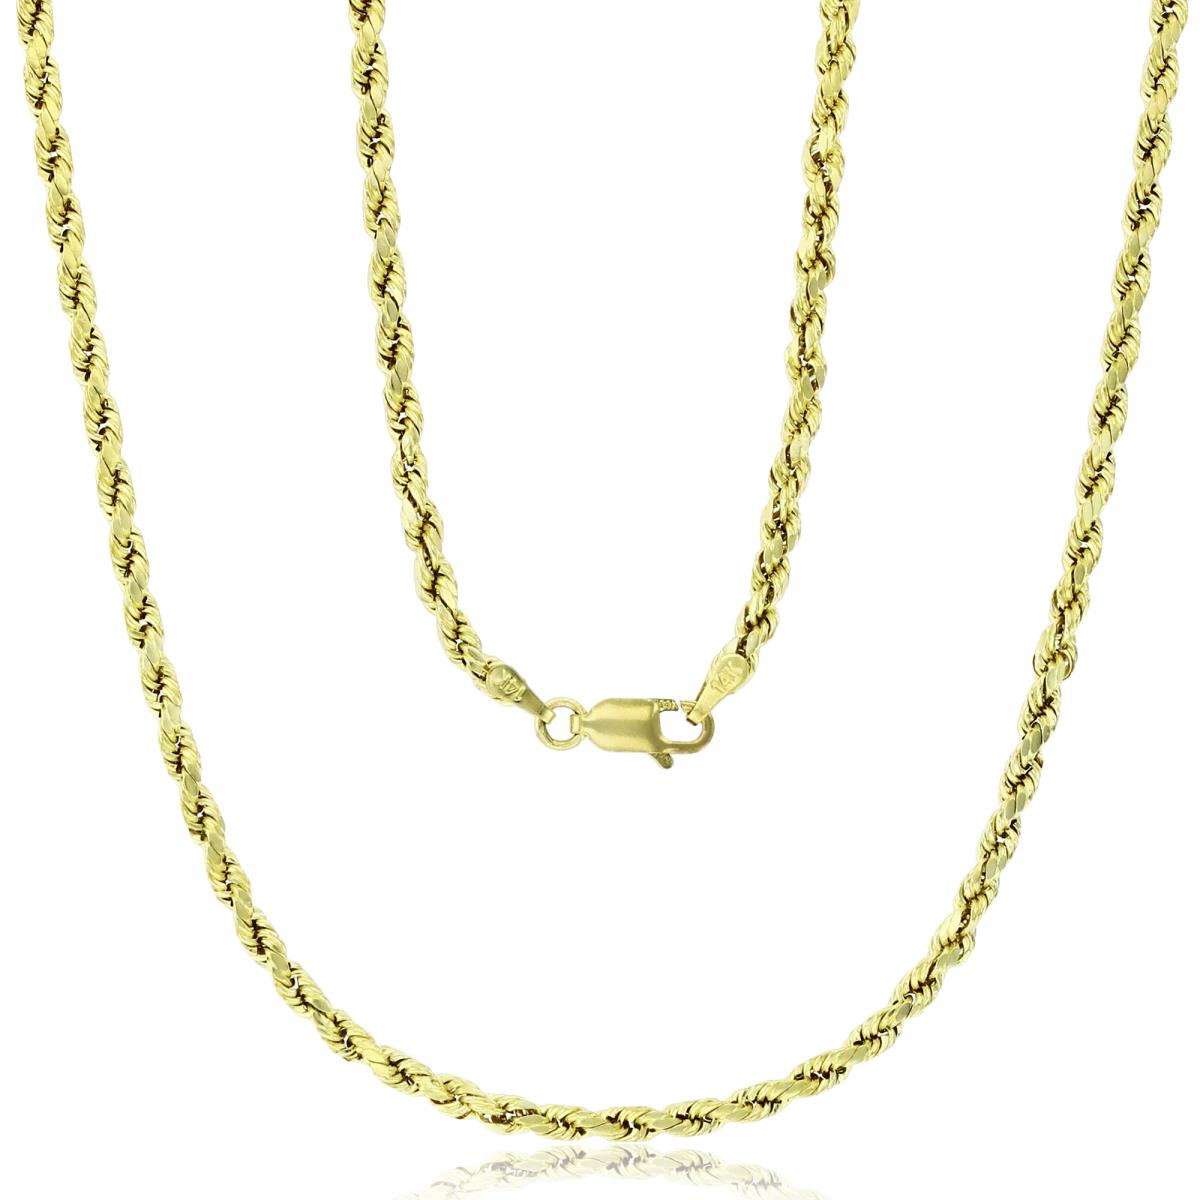 10k Yellow Gold 3mm DC Hollow Rope 021 7.50" Chain Bracelet